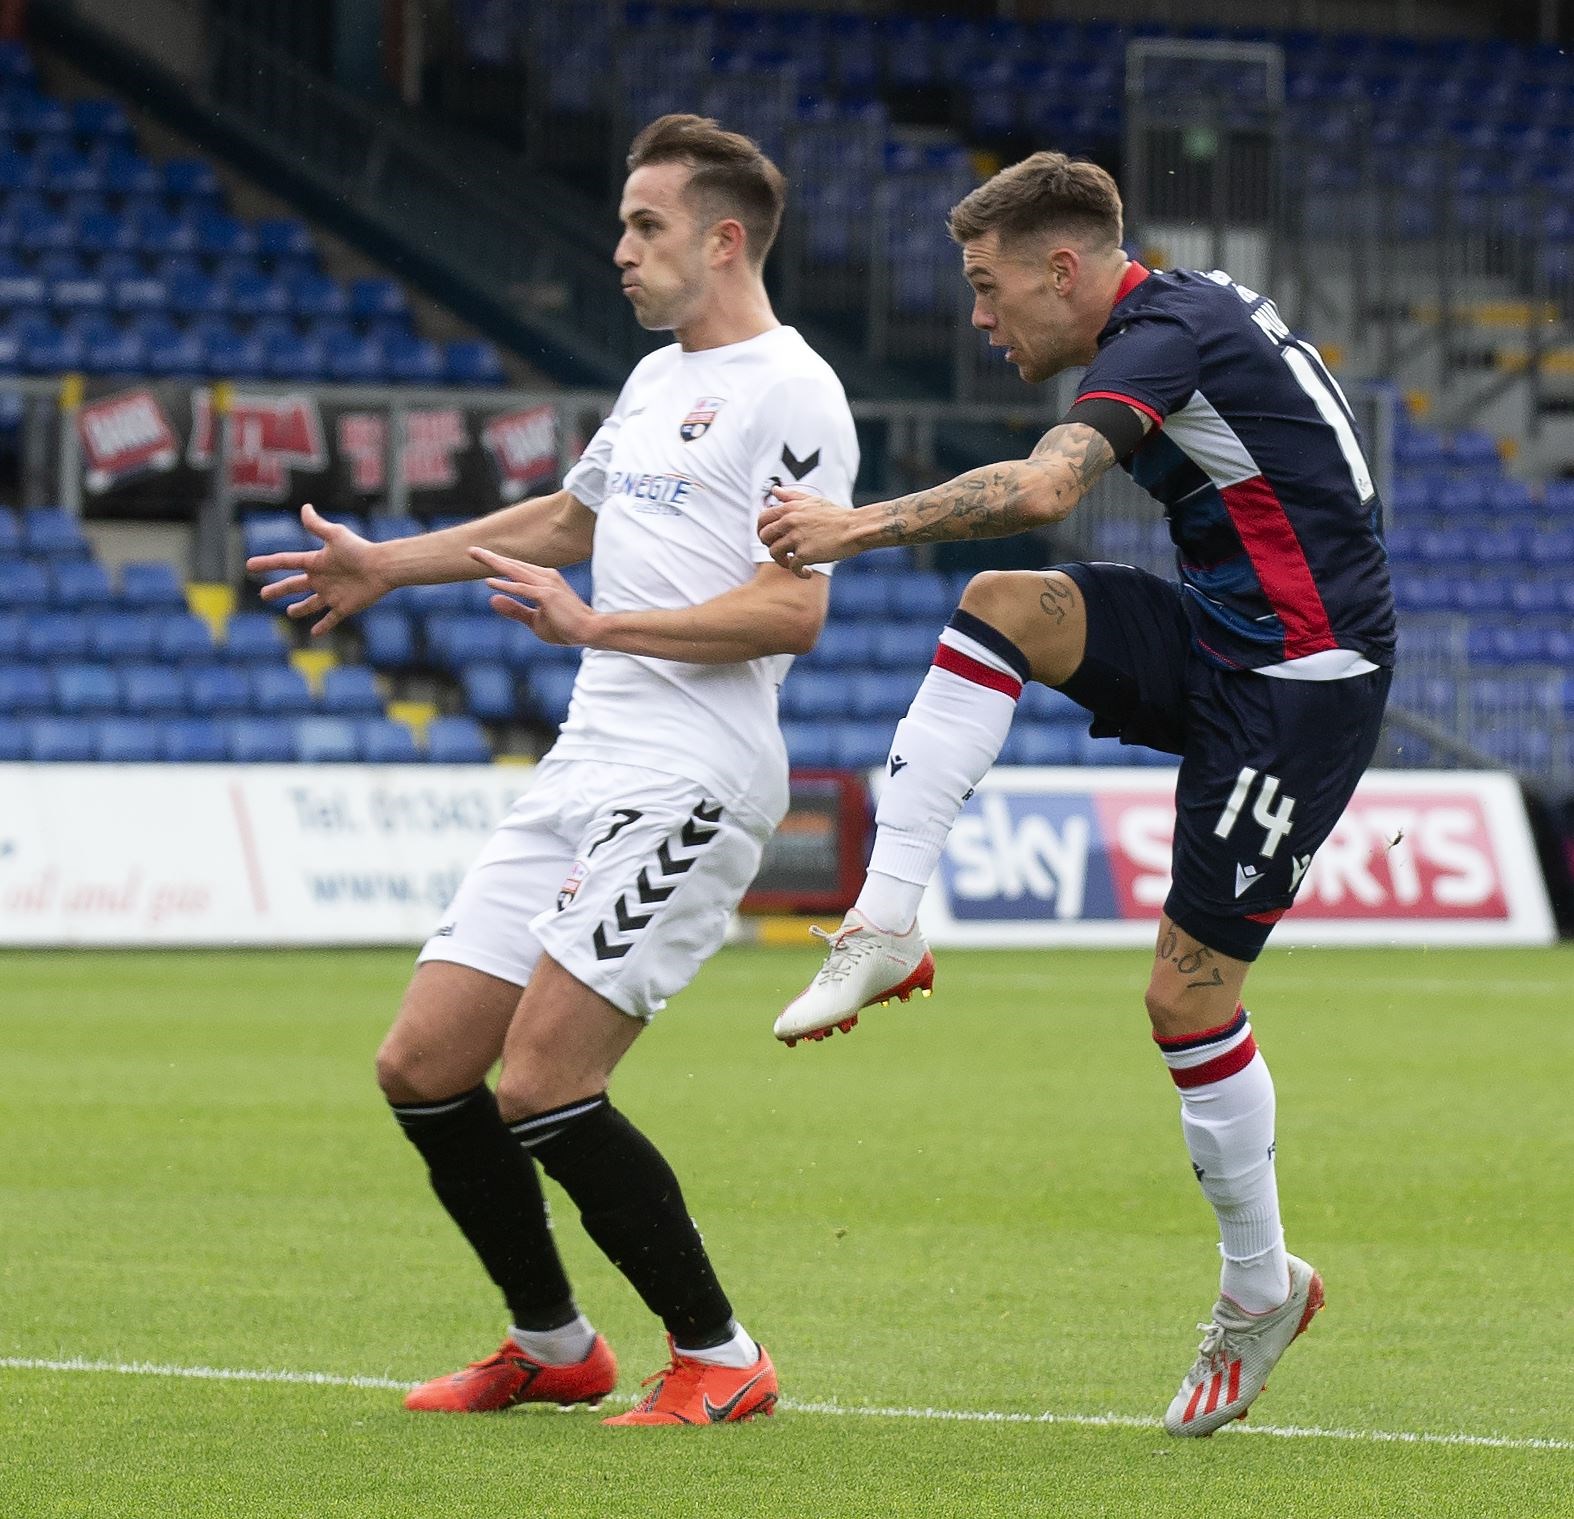 Ross County's Josh Mullin wants to keep the club's unbeaten run going after a good start in the Betfred Cup and Premiership. Picture: Ken Macpherson